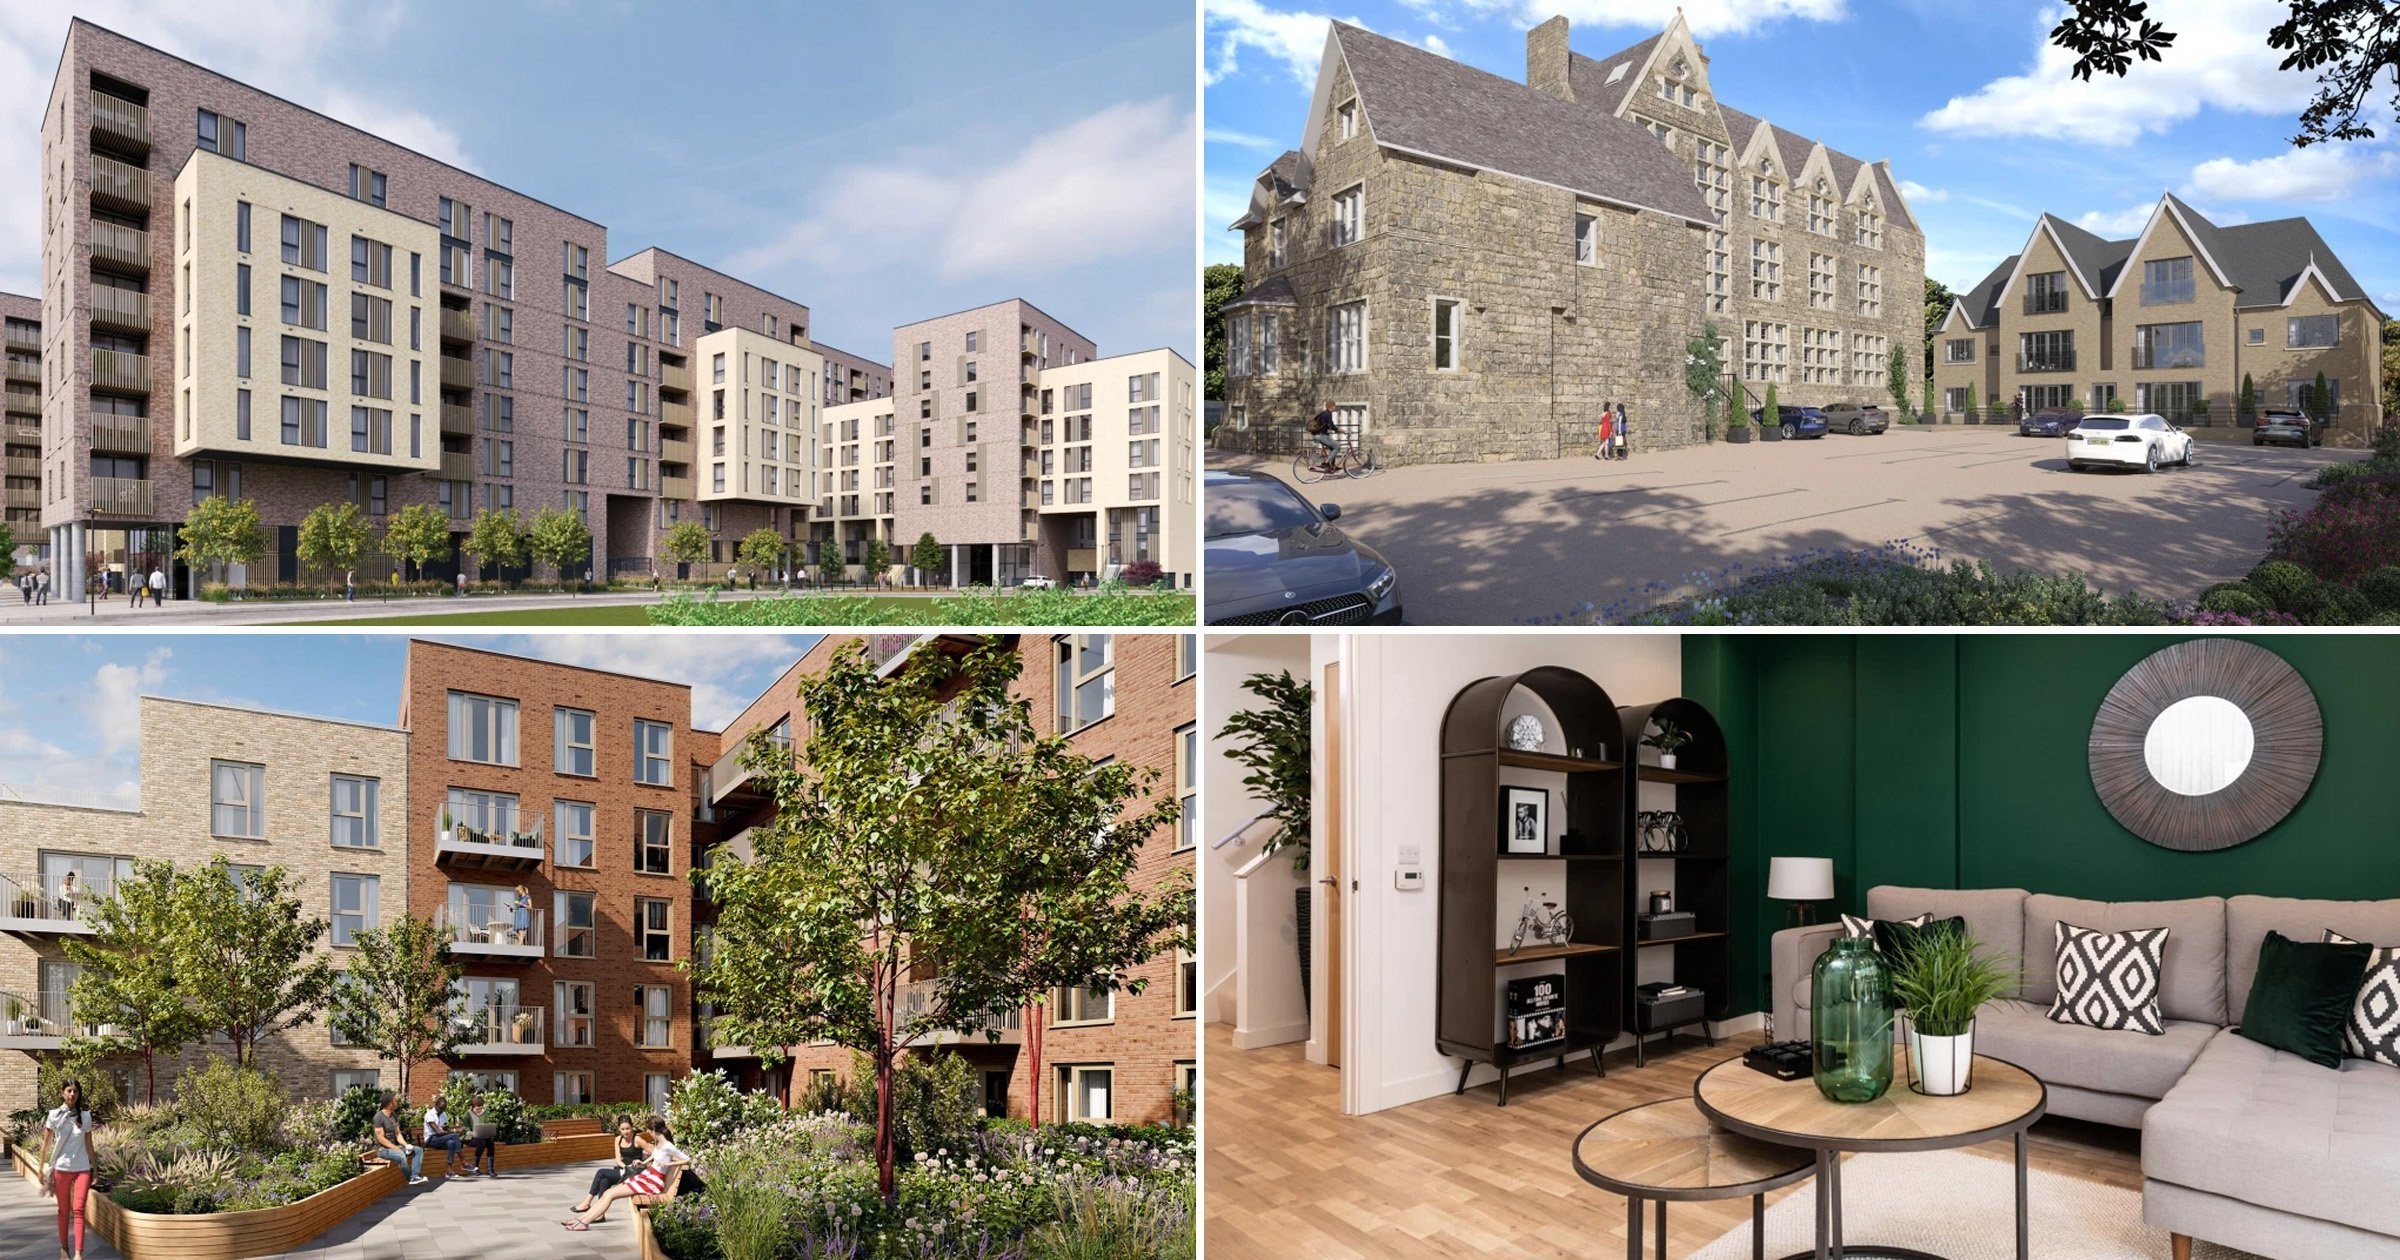 New flats that are perfect for first-time buyers